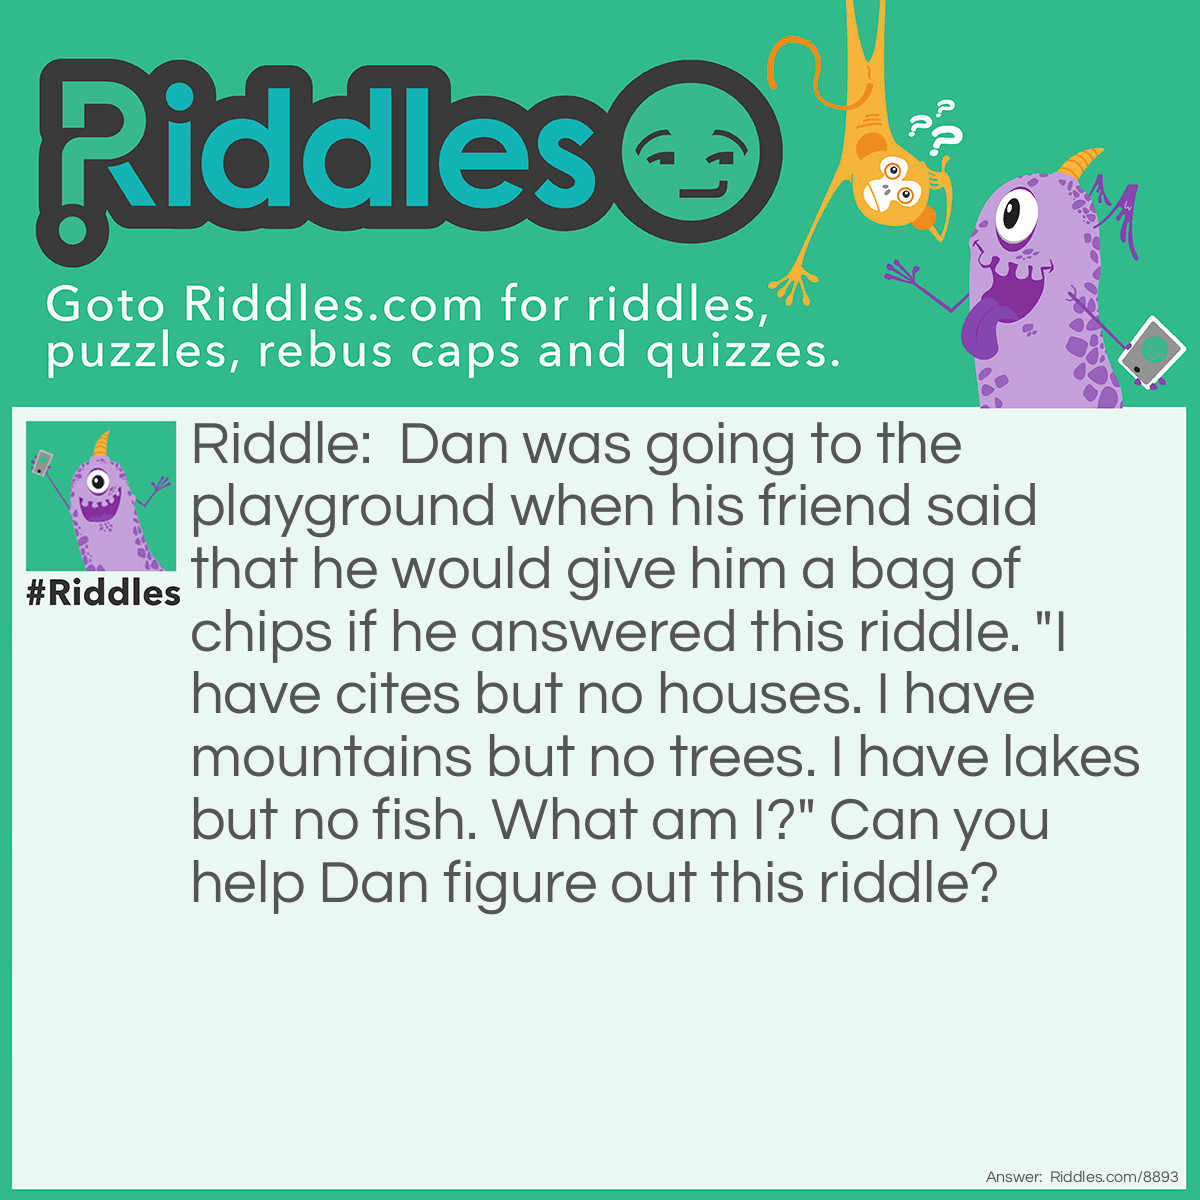 Riddle: Dan was going to the playground when his friend said that he would give him a bag of chips if he answered this <a href="https://www.riddles.com">riddle</a>. "I have cites but no houses. I have mountains but no trees. I have lakes but no fish. What am I?" Can you help Dan figure out this riddle? Answer: A map.